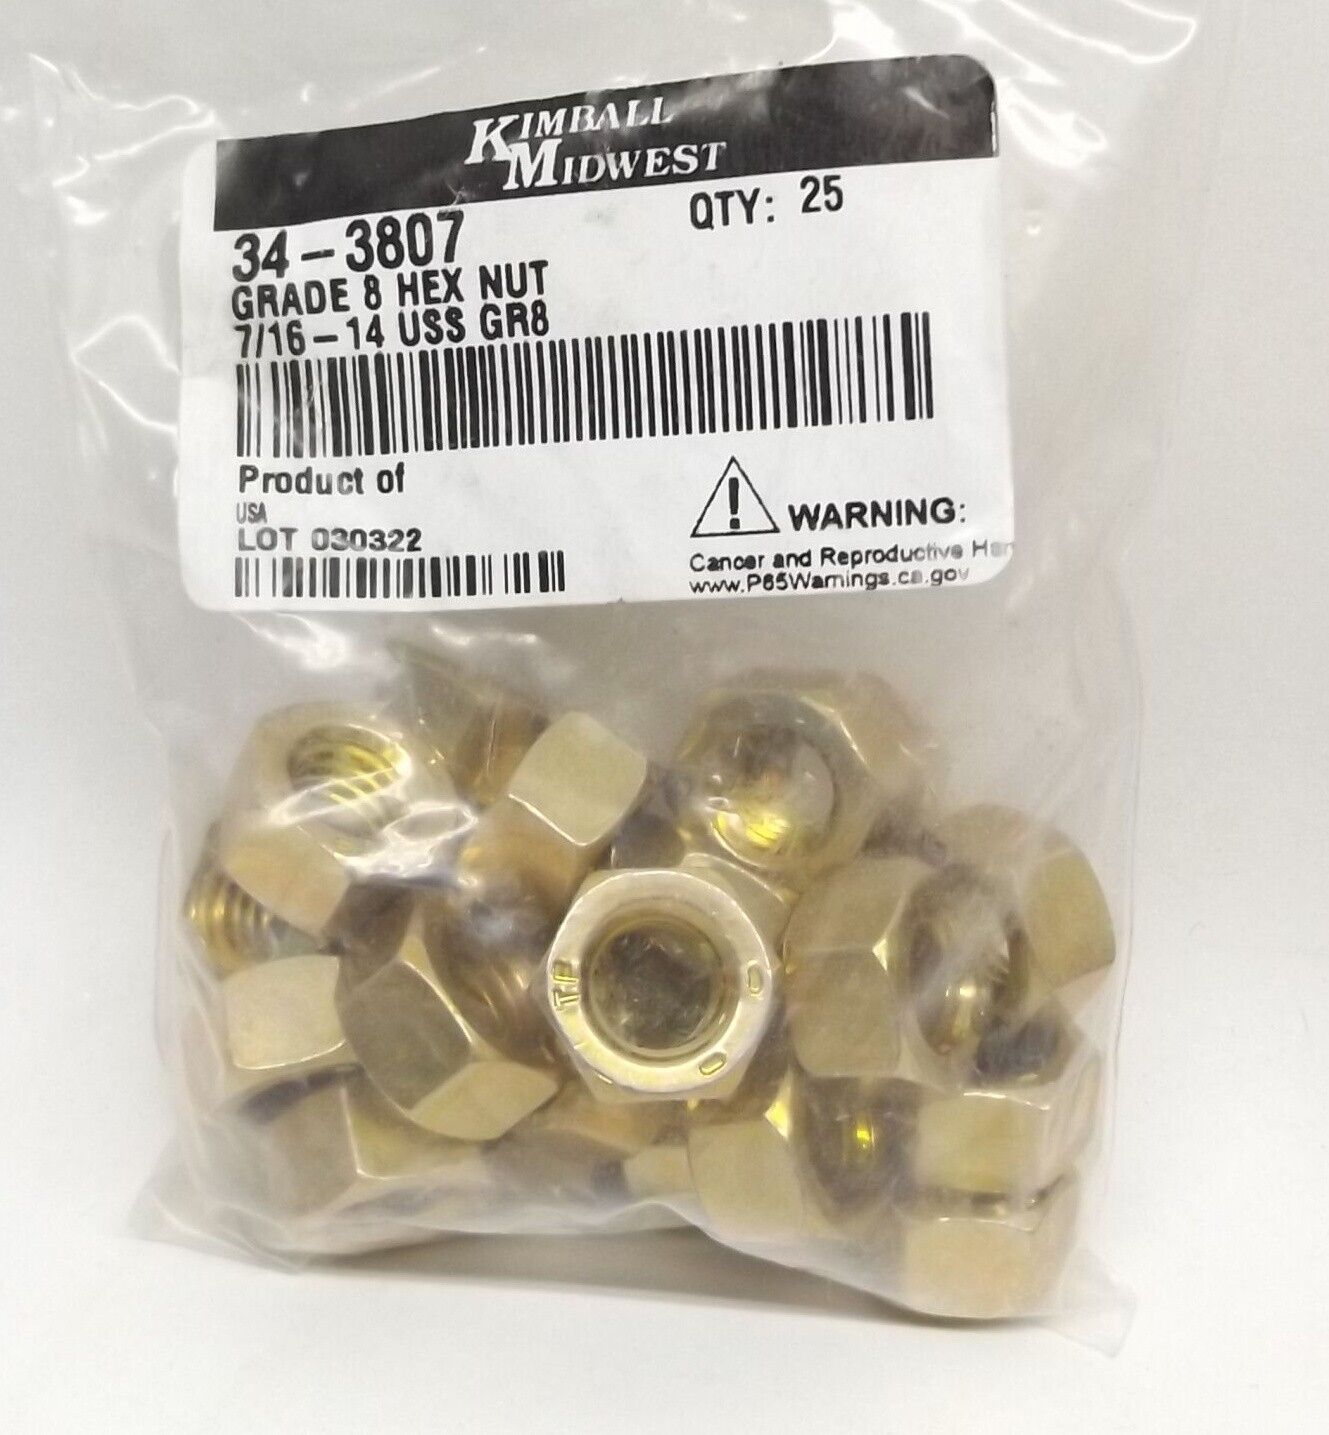 (25) KIMBALL MIDWEST 34-3807  7/16-14 GRADE 8 HEX NUT USS